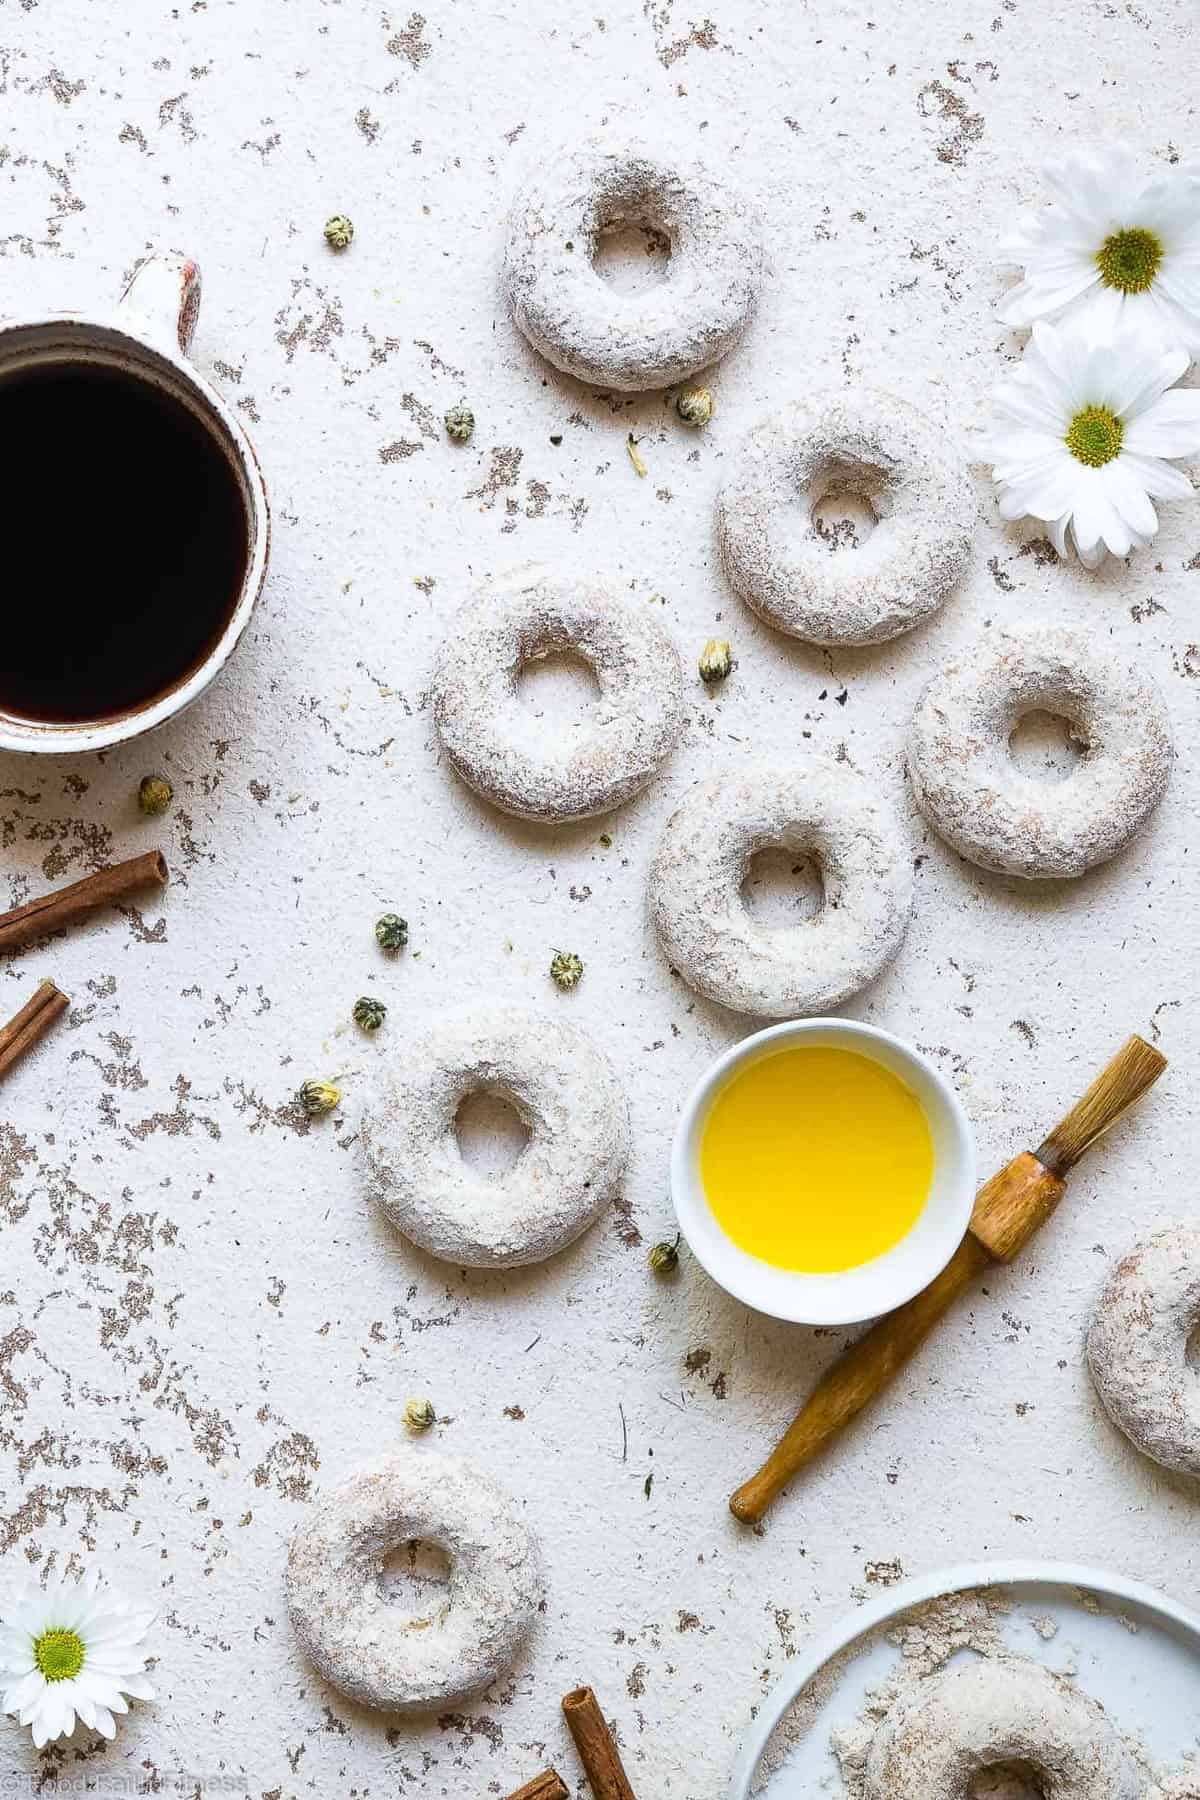 Cinnamon Baked Protein Donuts - This gluten free Healthy Protein Donuts Recipe is soft, fluffy and secretly protein packed! A perfect treat to curb your sweet tooth, and a dairy-free option is included! Great for kids and adults! | #Glutenfree #Dairyfree #Healthy #Donuts #Dessert